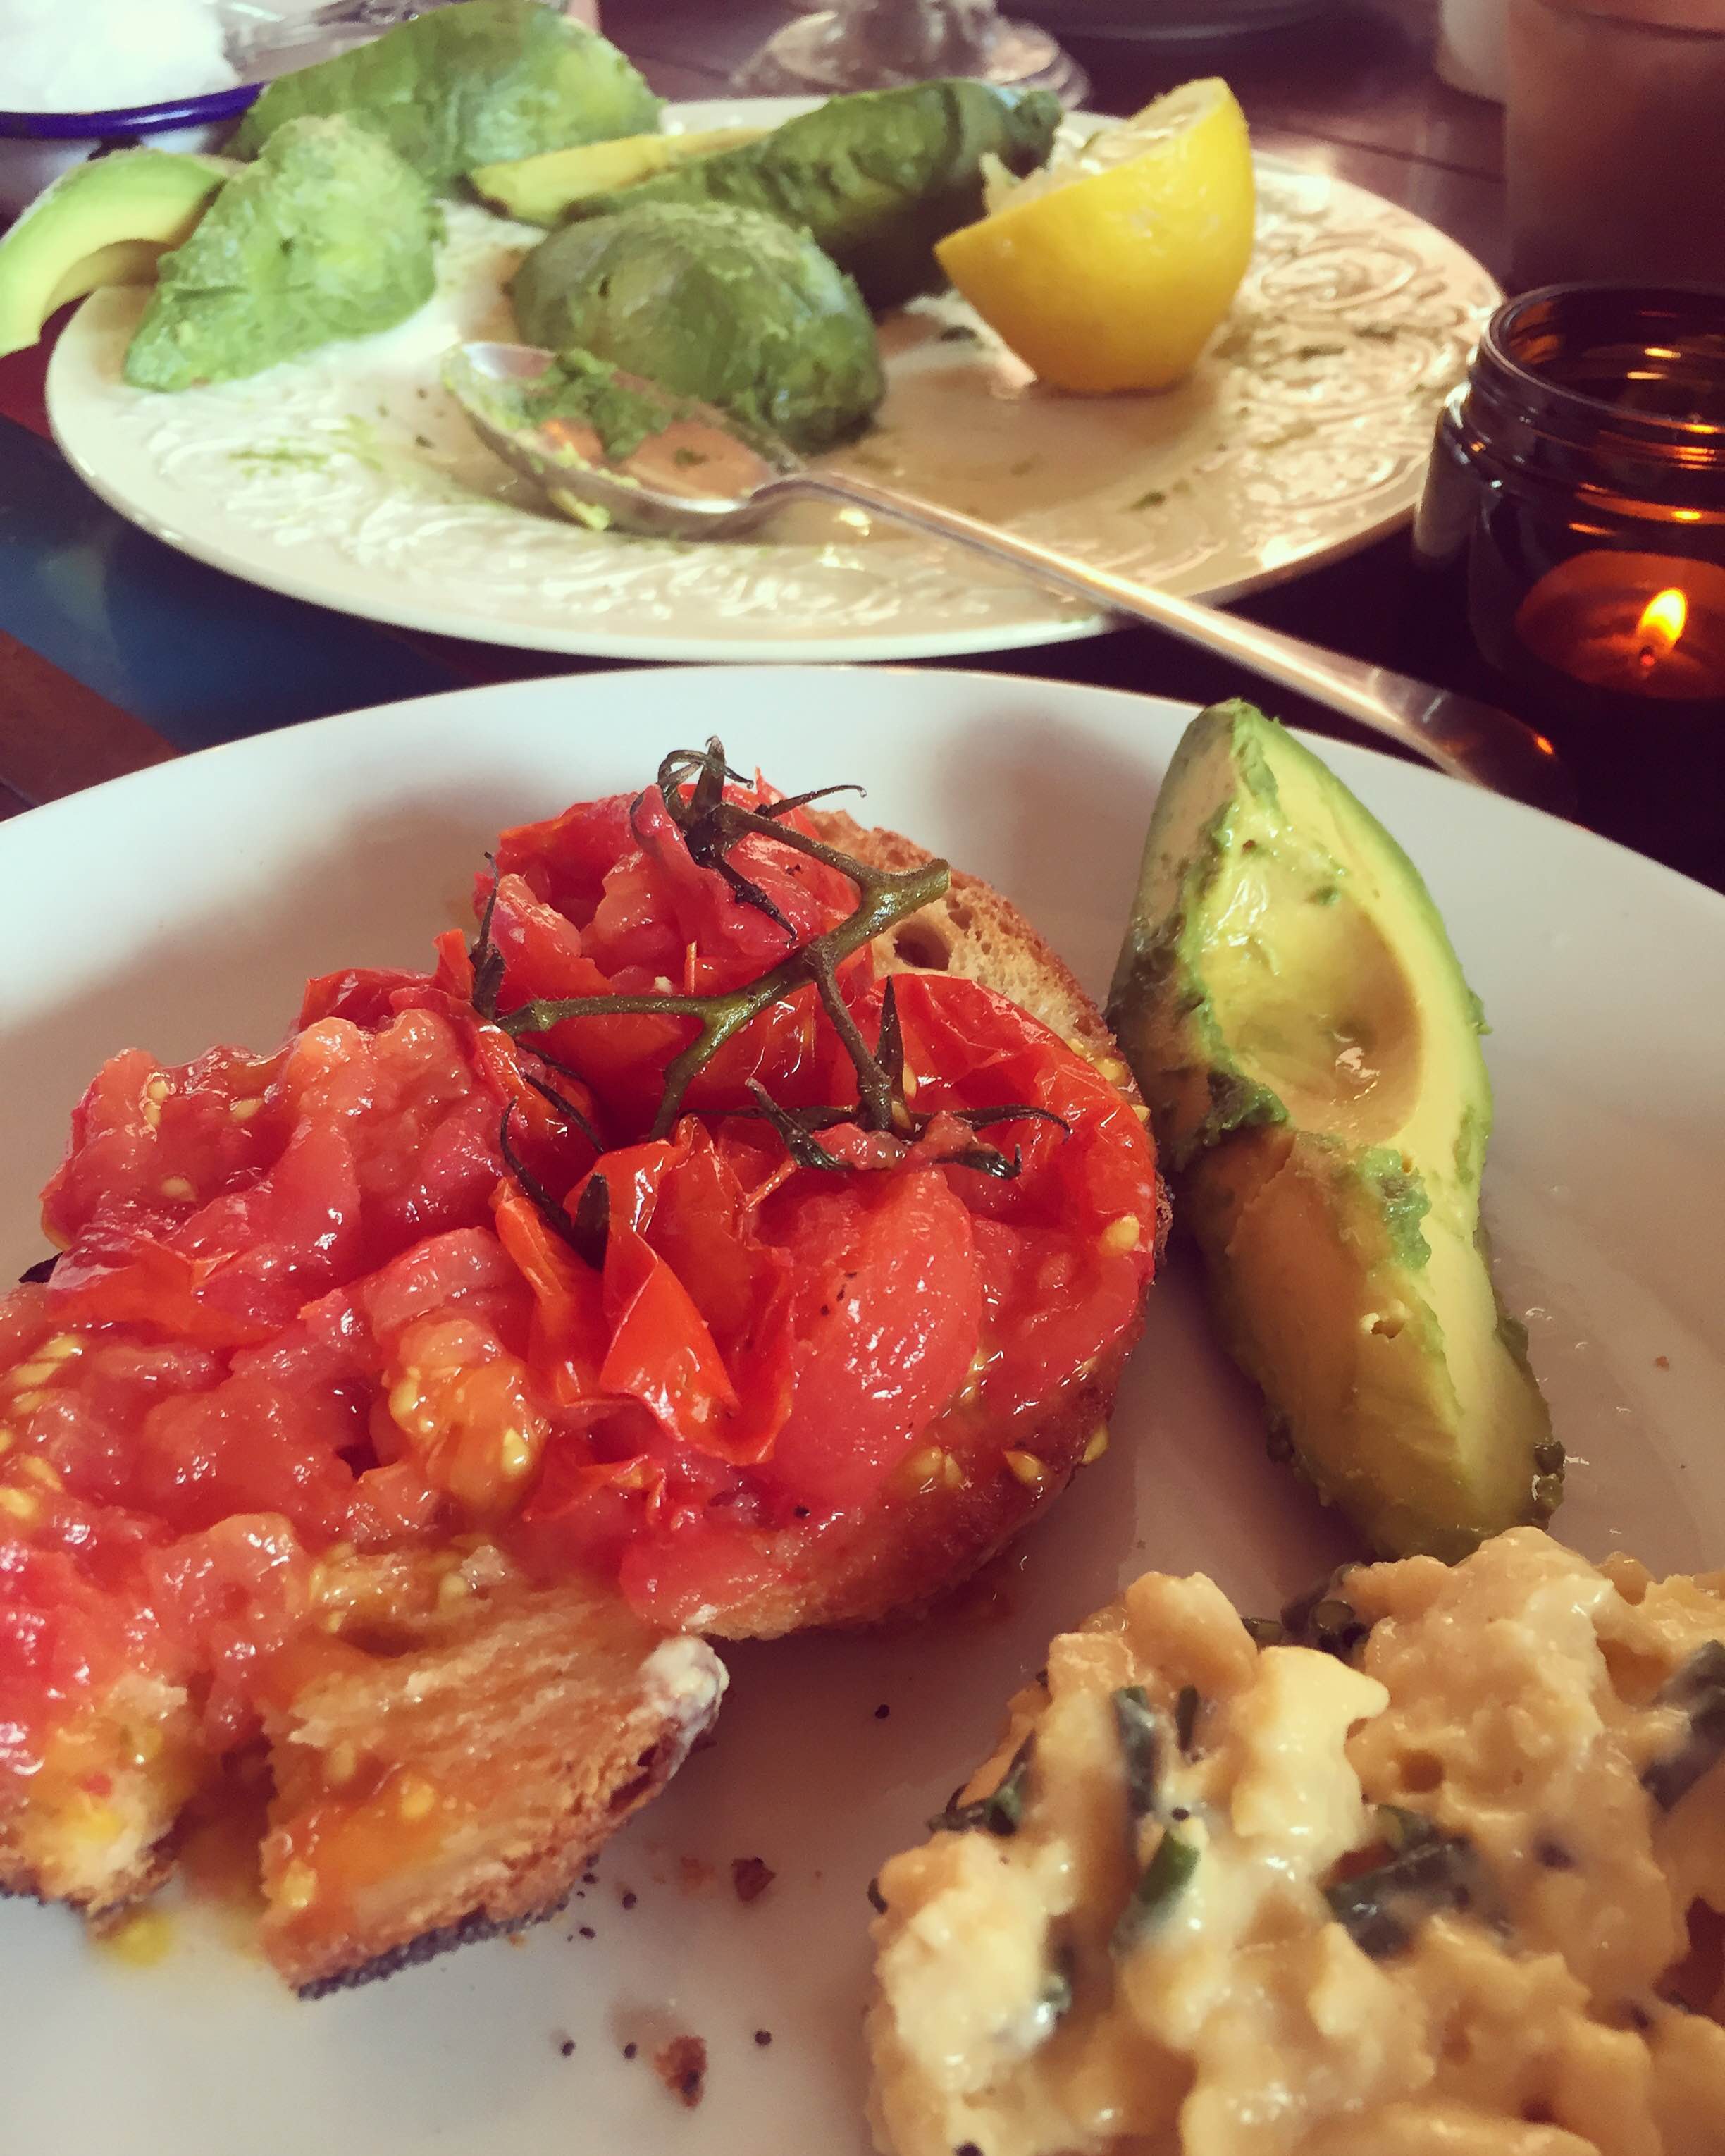 The Dreamiest Yoga Brunch - Image 1